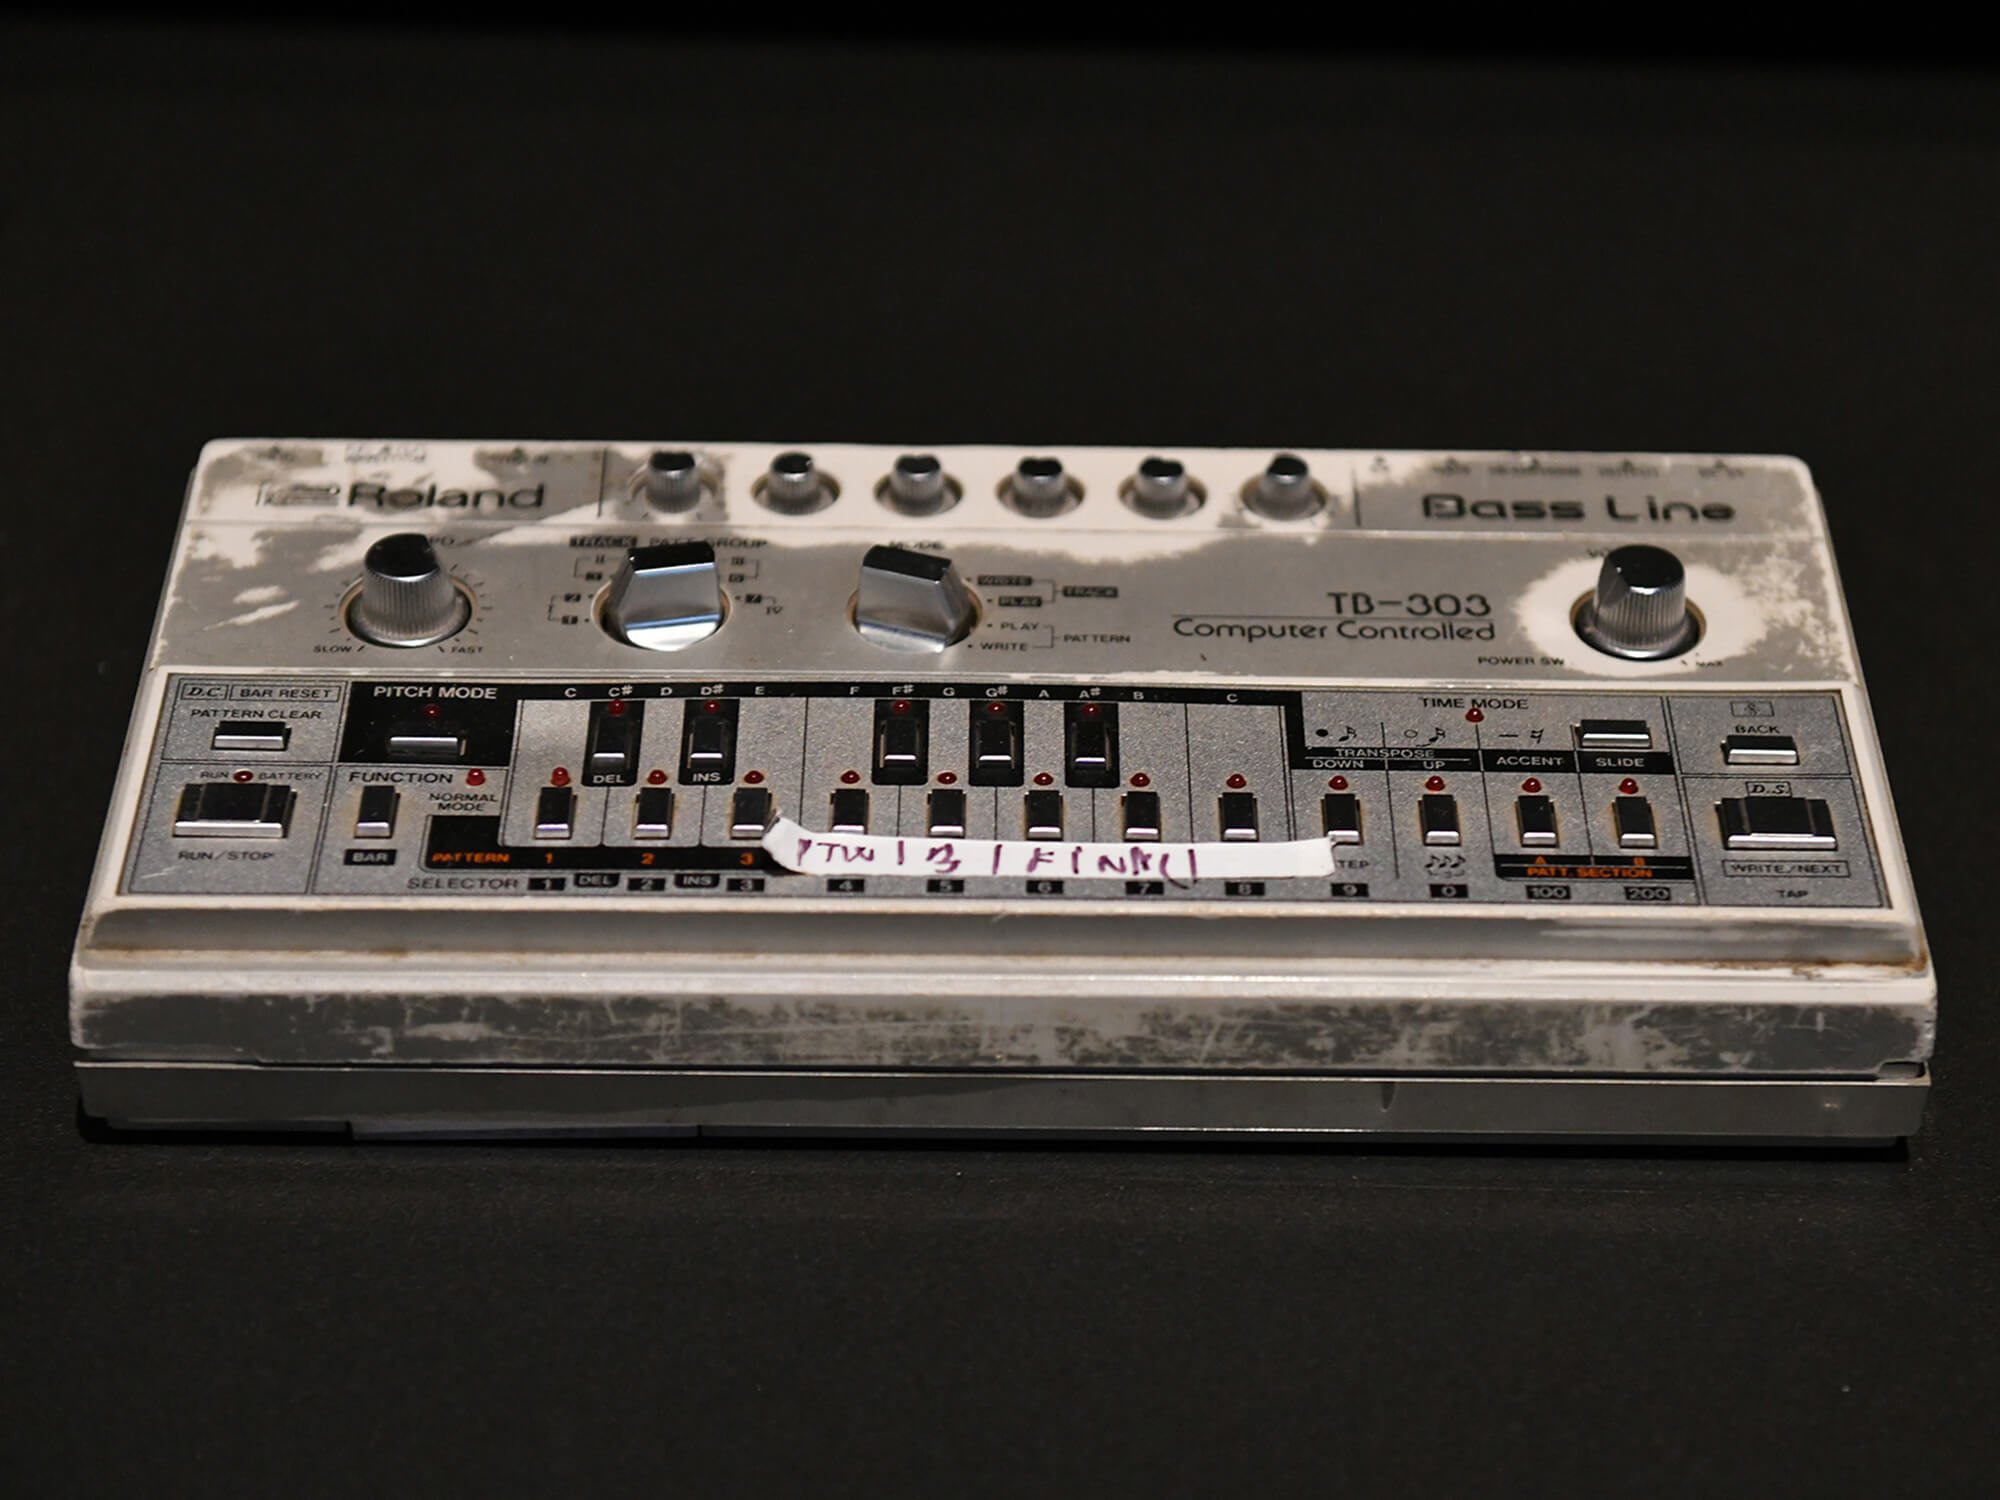 A TB-303 at the exhibition ‘Electronic: From Kraftwerk to The Chemical Brothers’ at The Design Museum in London, 2020, photo by David M. Benett/Dave Benett/Getty Images